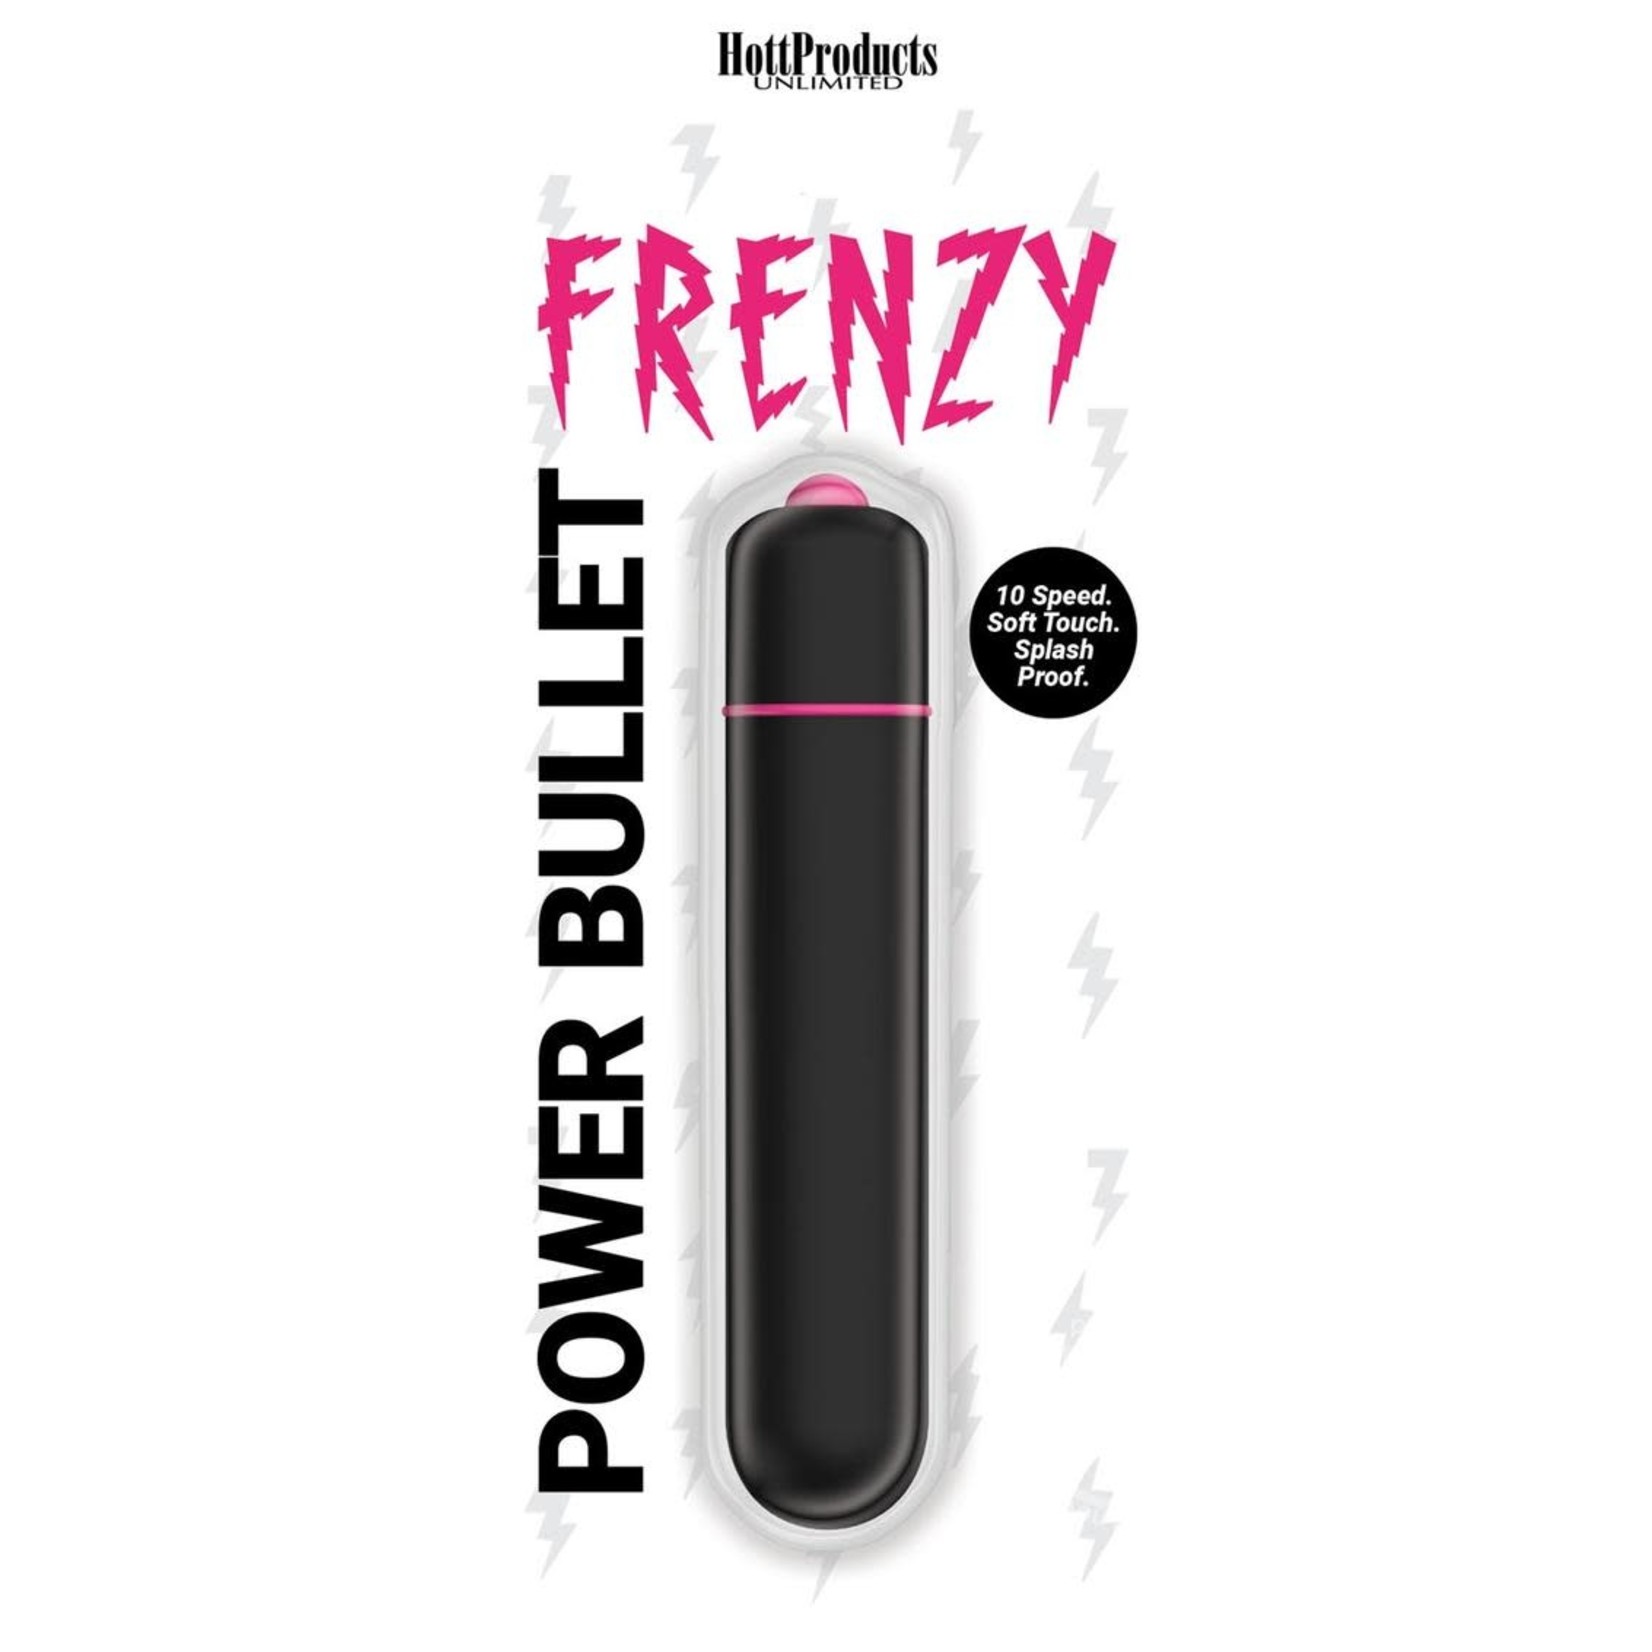 Frenzy Silicone Bullet - Black